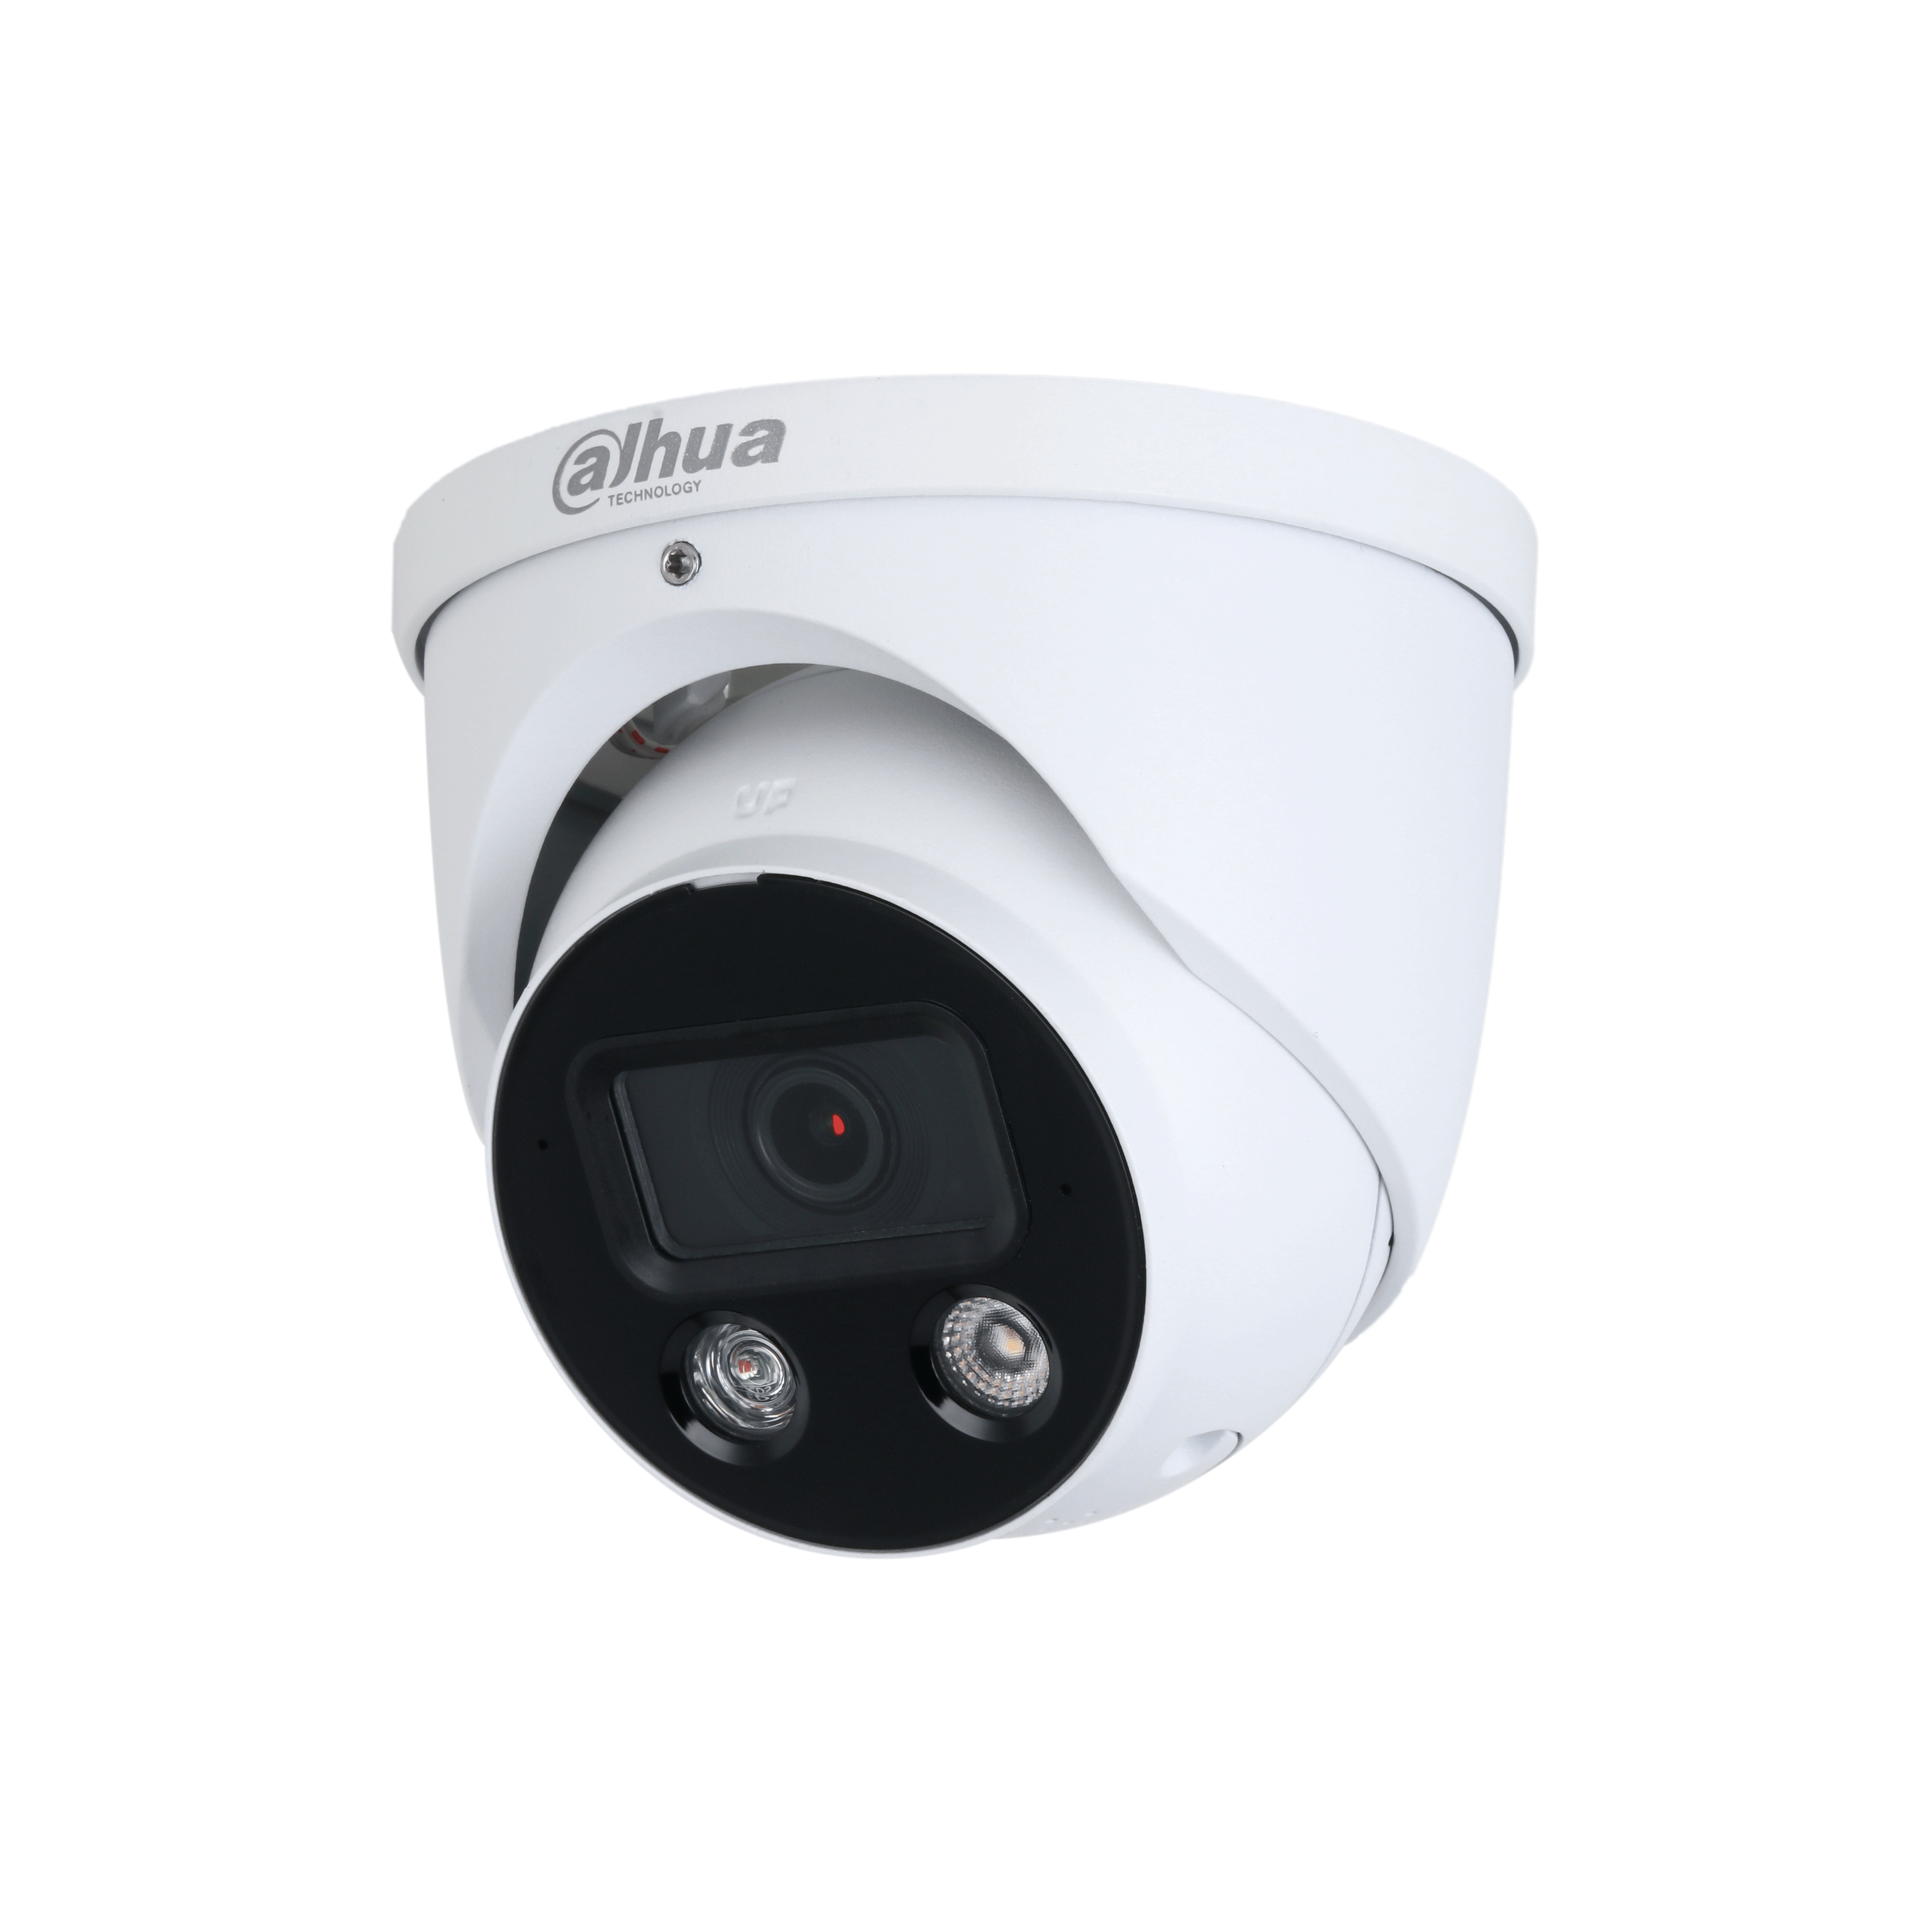 DH-IPC-HDW3649H-AS-PV-ANZ - Dahua - 6 MP Smart Dual Illumination Active Deterrence - 0